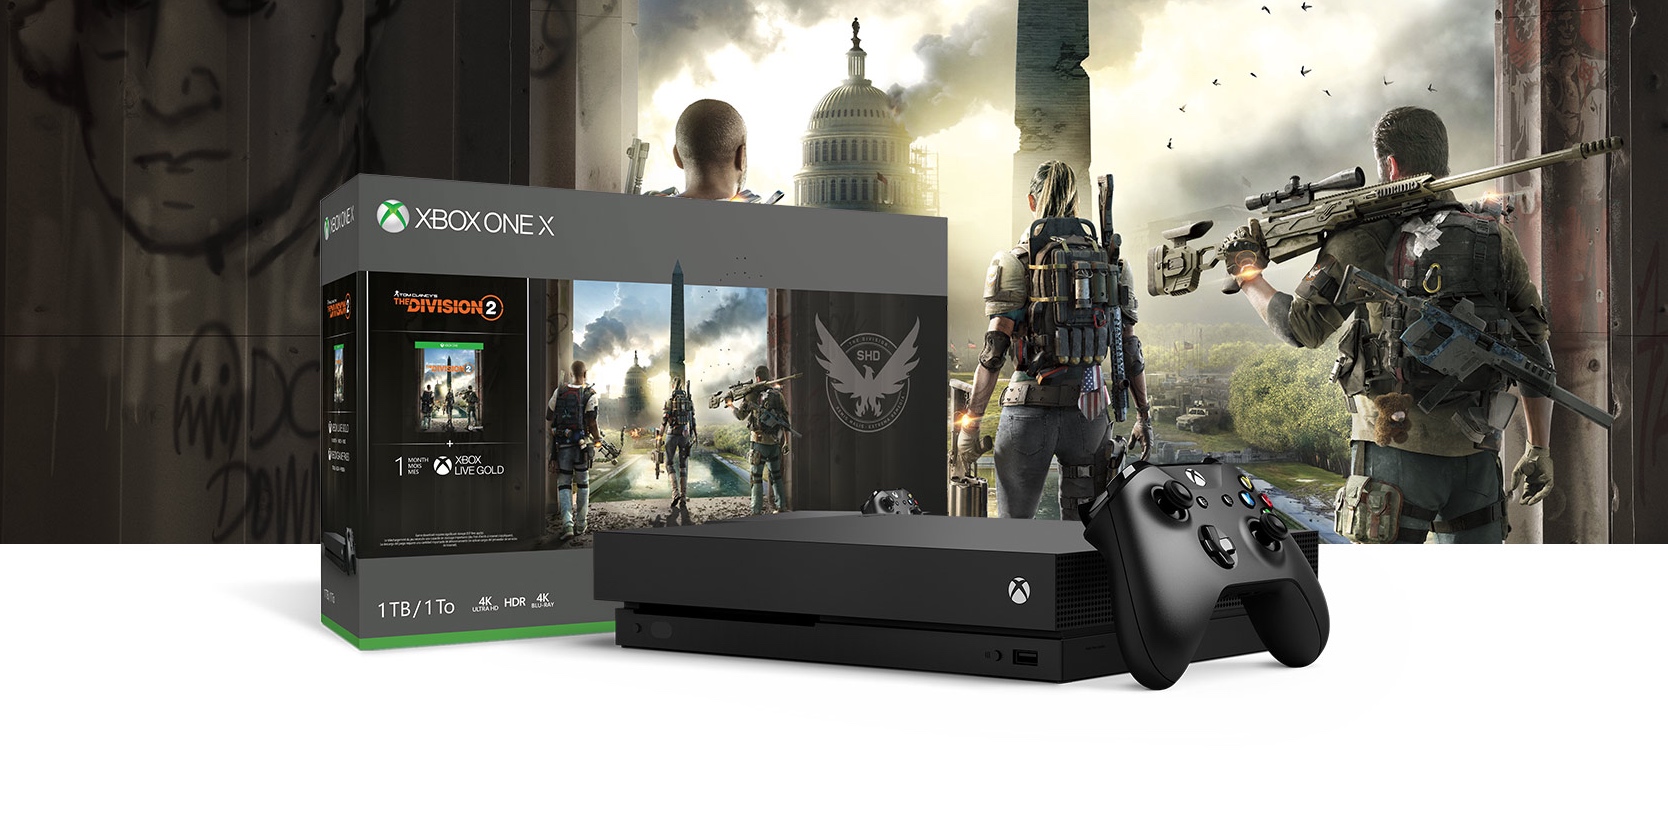 deepen Scold capacity The Xbox One X 1TB Division 2 Bundle is nearly $150 off right now